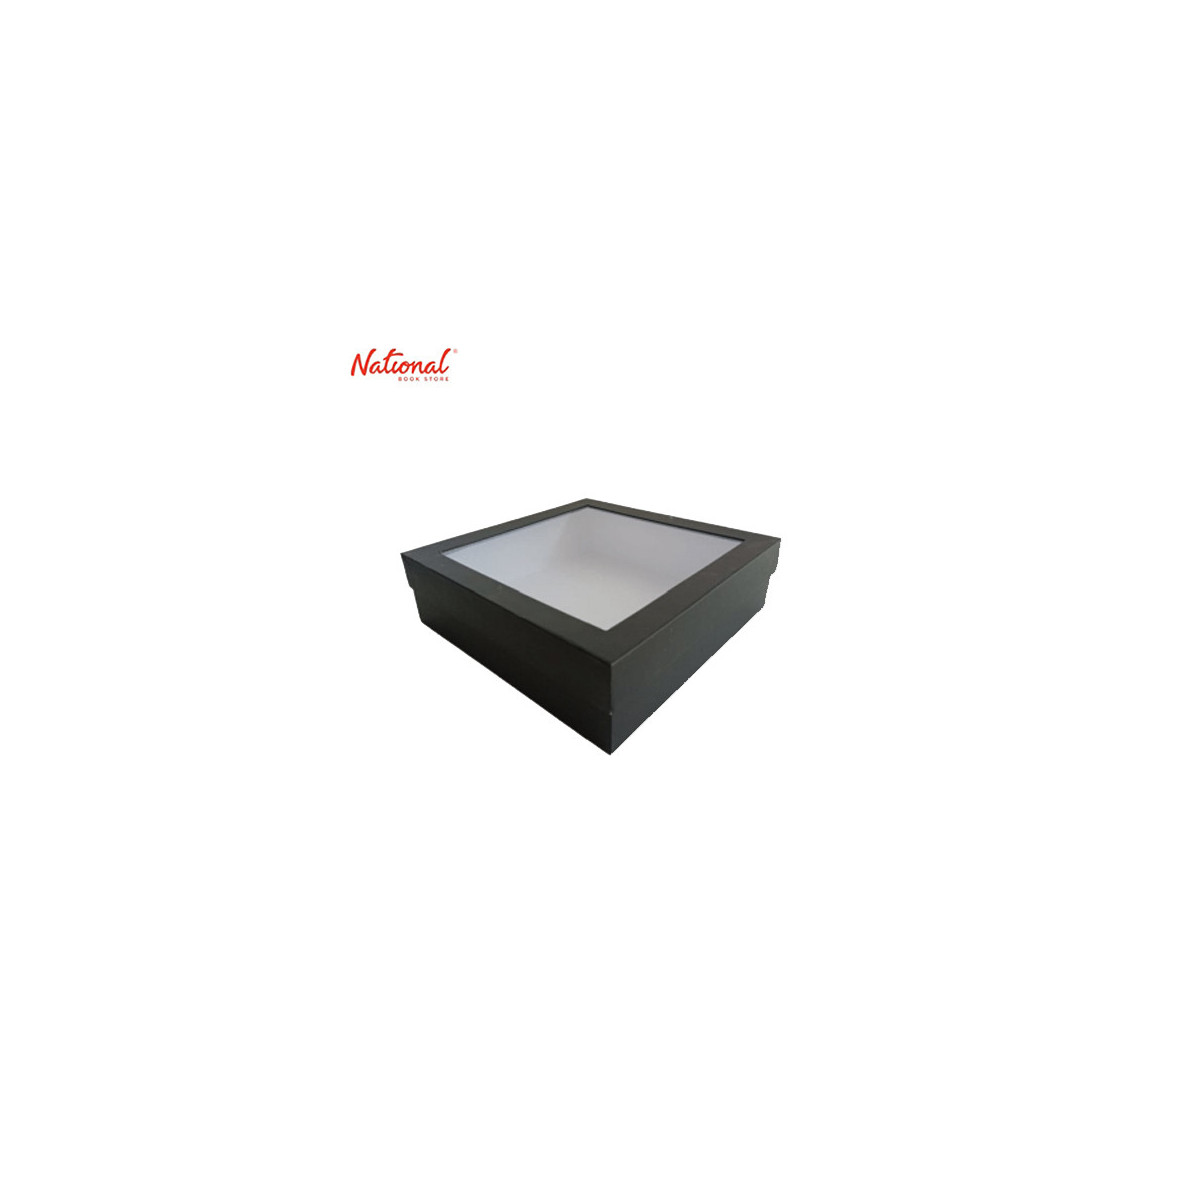 Plain Colored Gift Box Gr-Med 10.5 x 10.5 x 3.5 Inches, Black Grazing